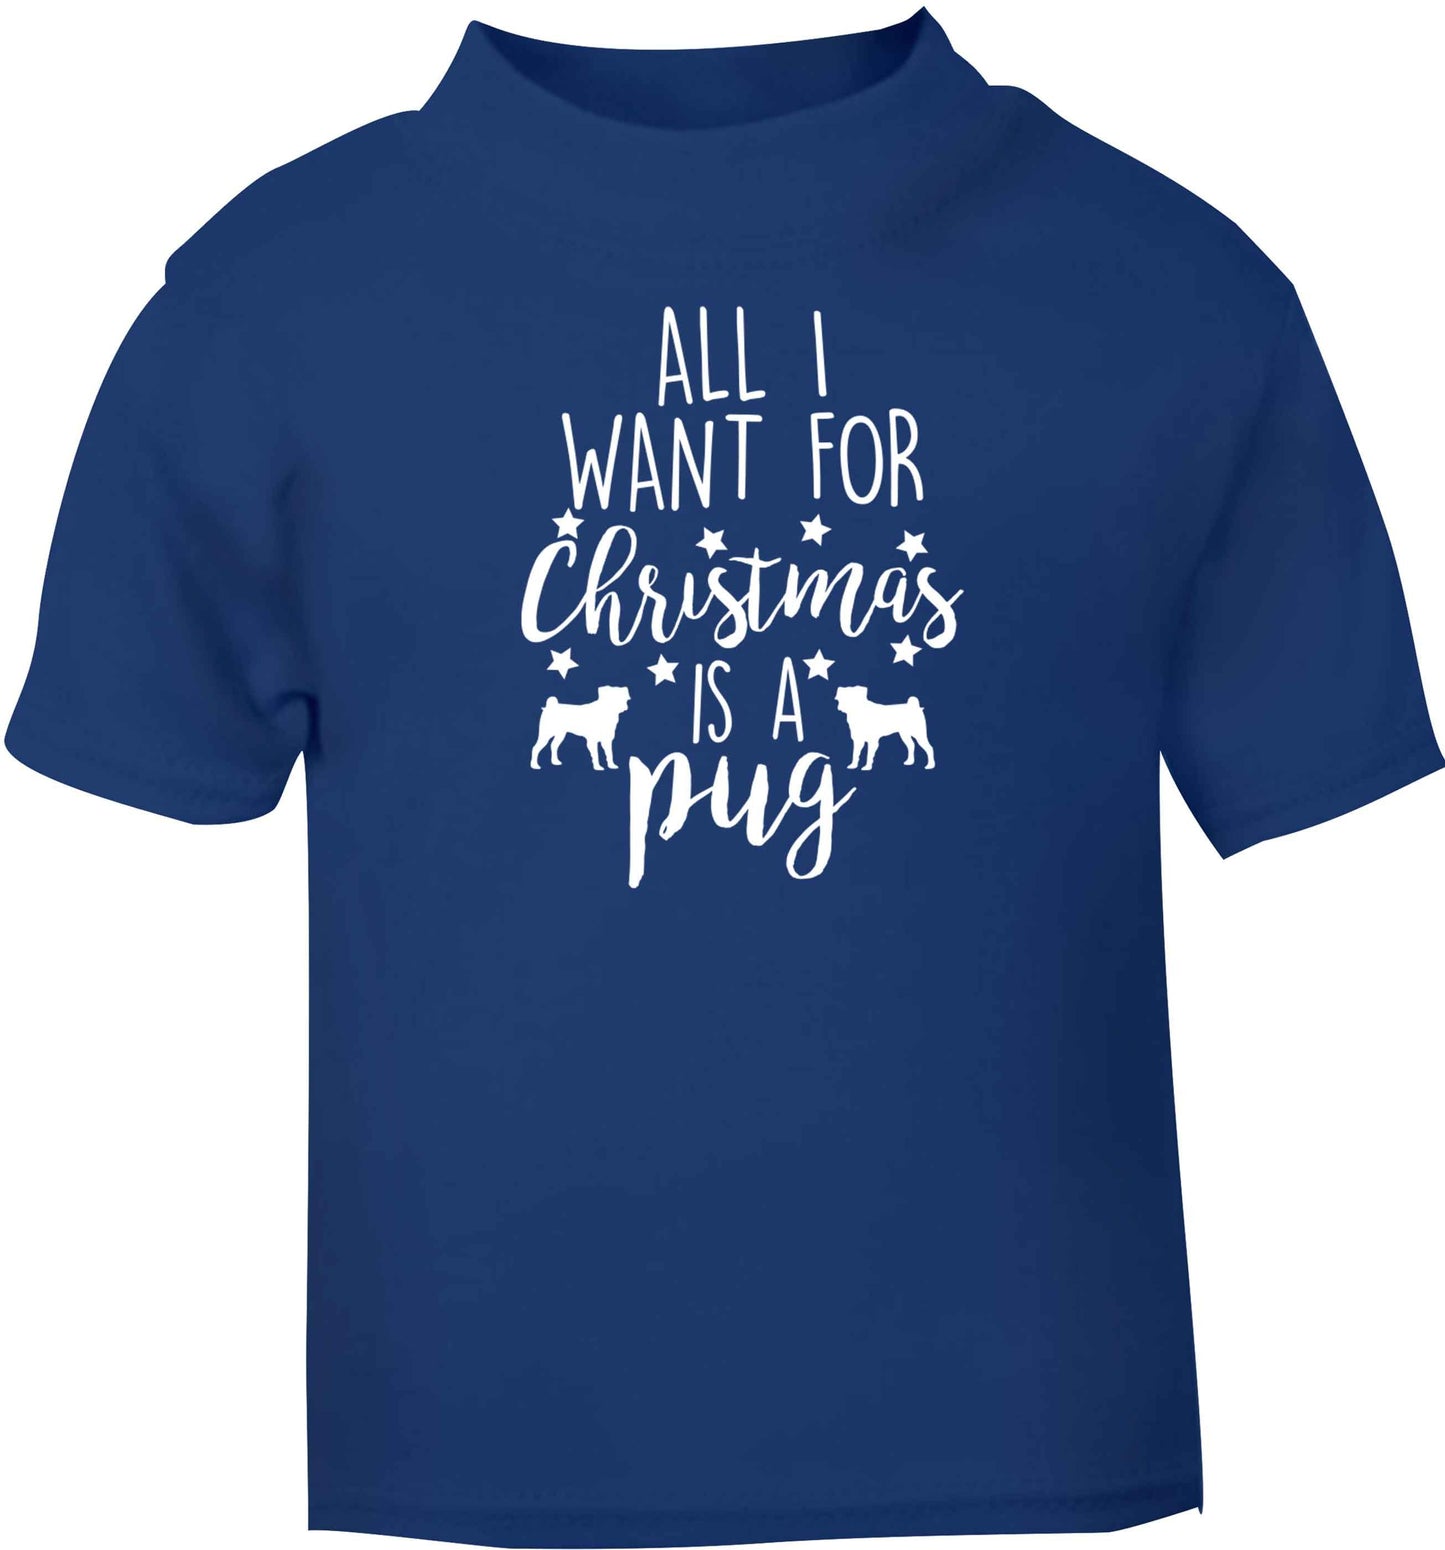 All I want for Christmas is a pug blue baby toddler Tshirt 2 Years